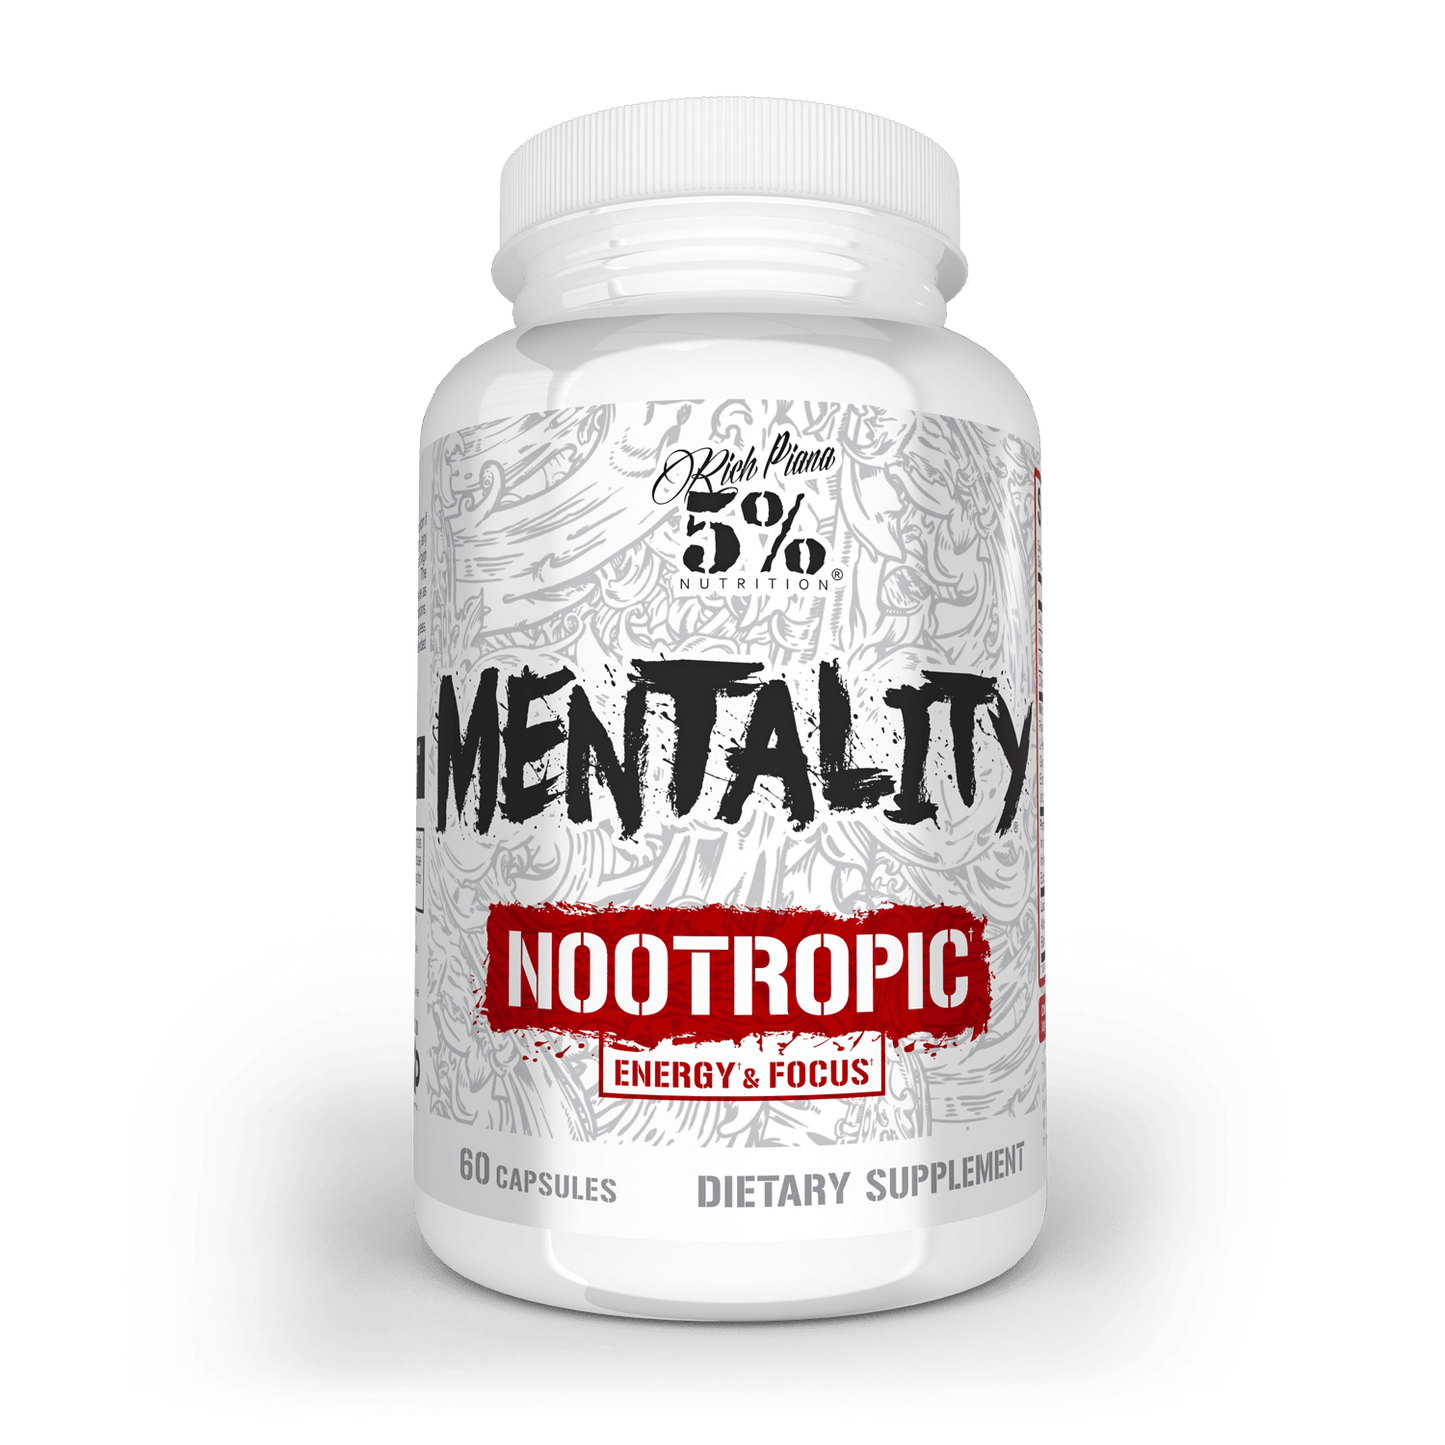 5% Nutrition Mentality